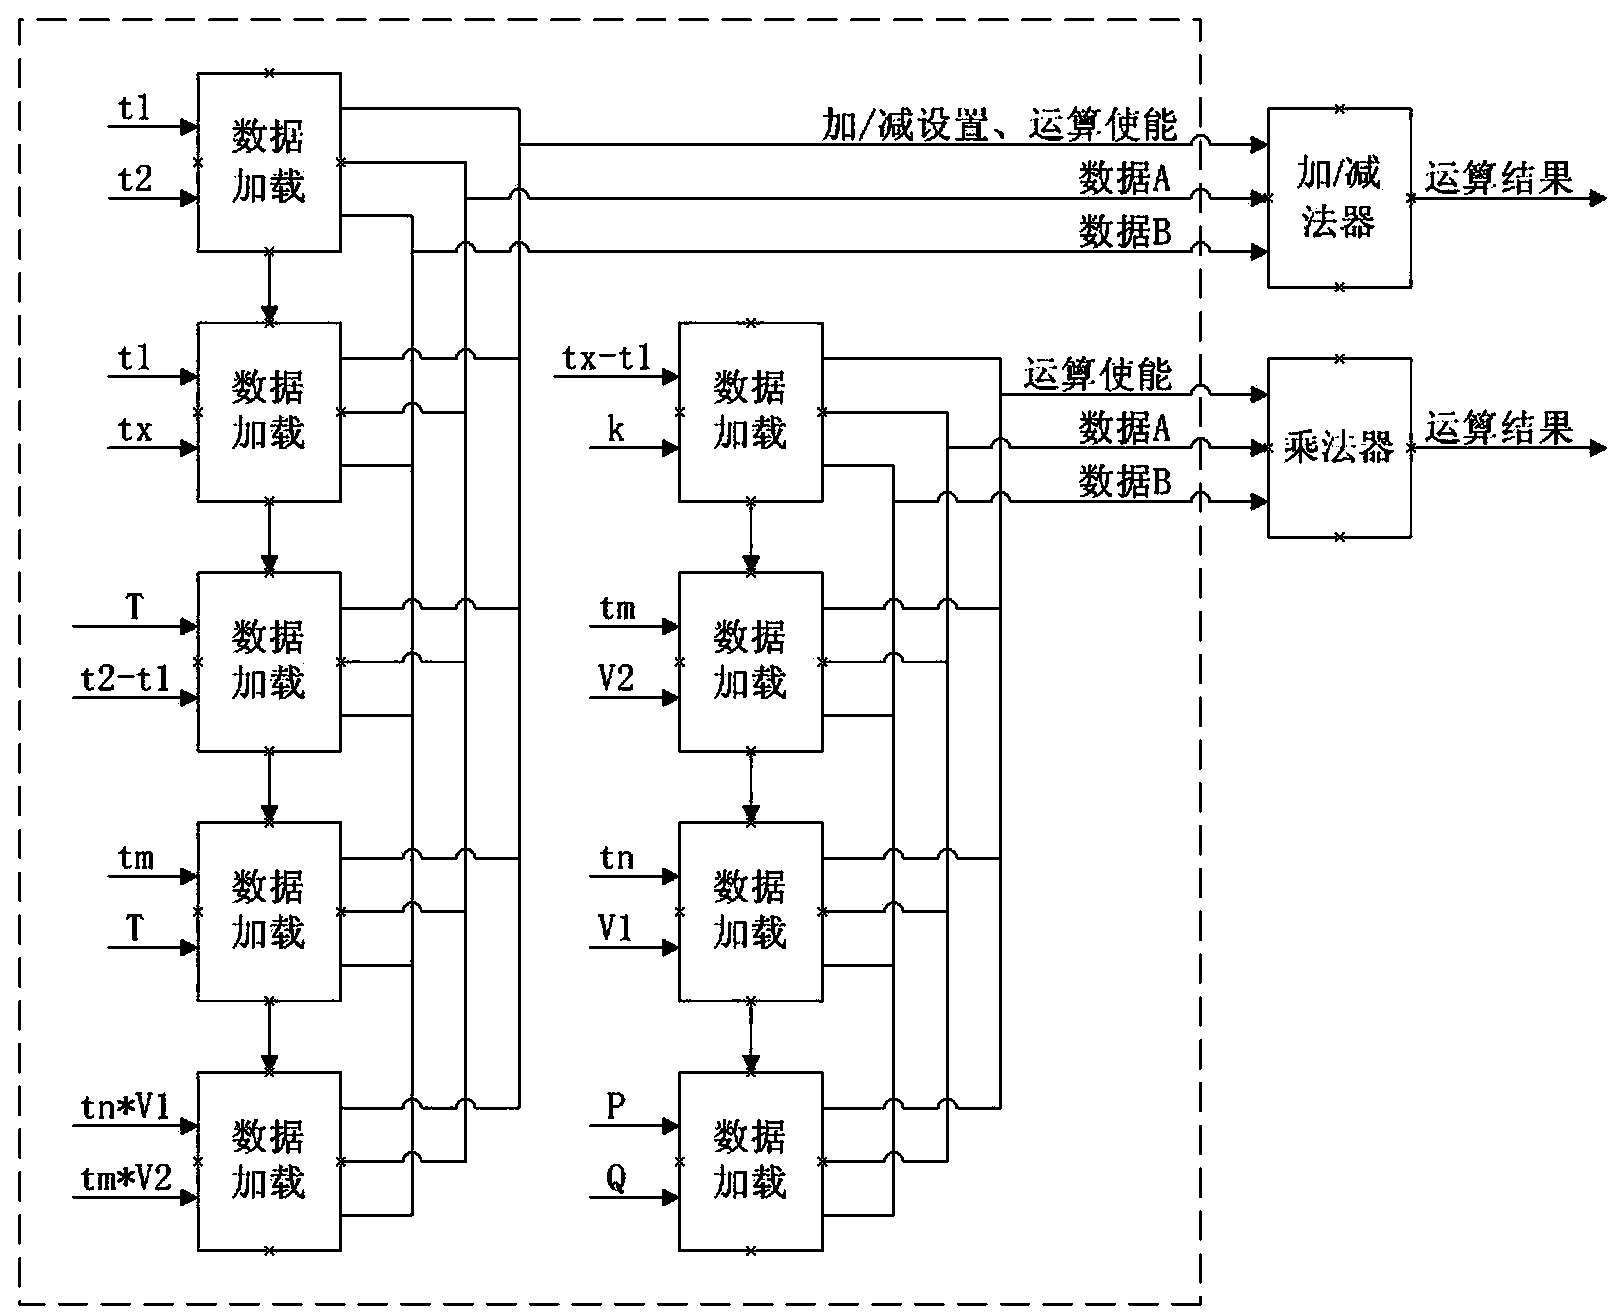 Sampling value linear interpolation calculation device based on FPGA (Field Programmable Gate Array) and calculation method